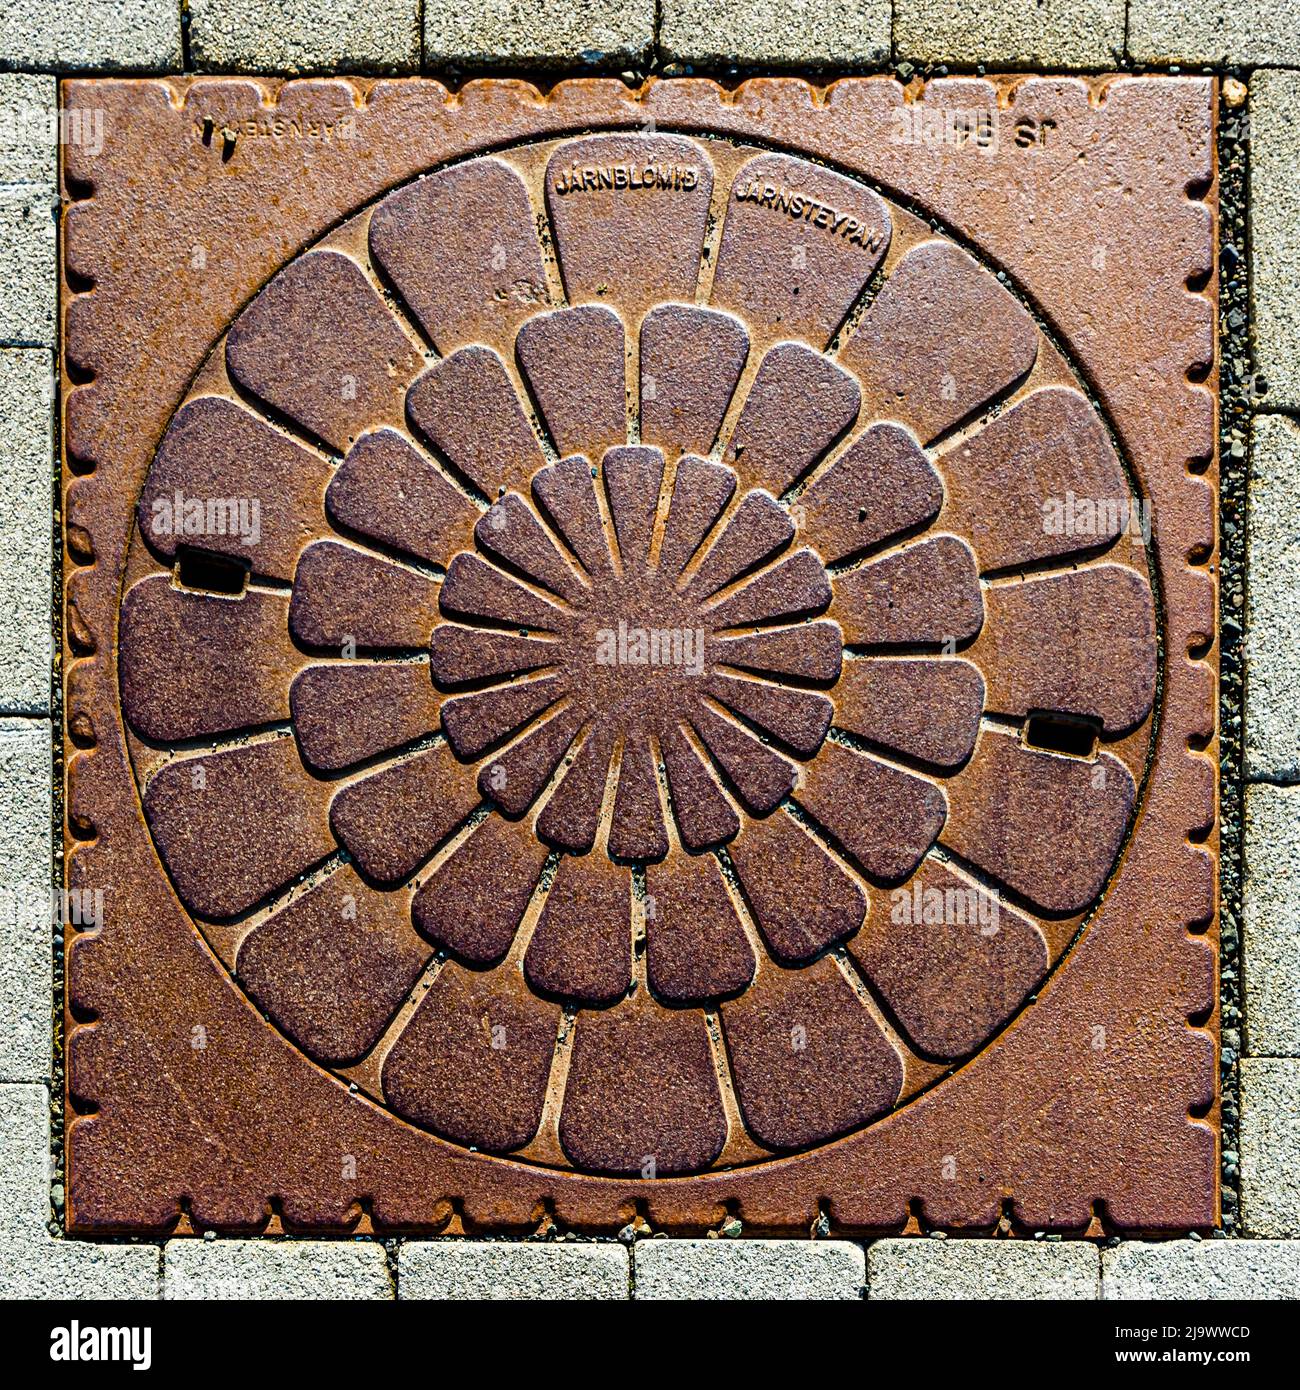 Manhole cover in Höfn, Iceland Stock Photo